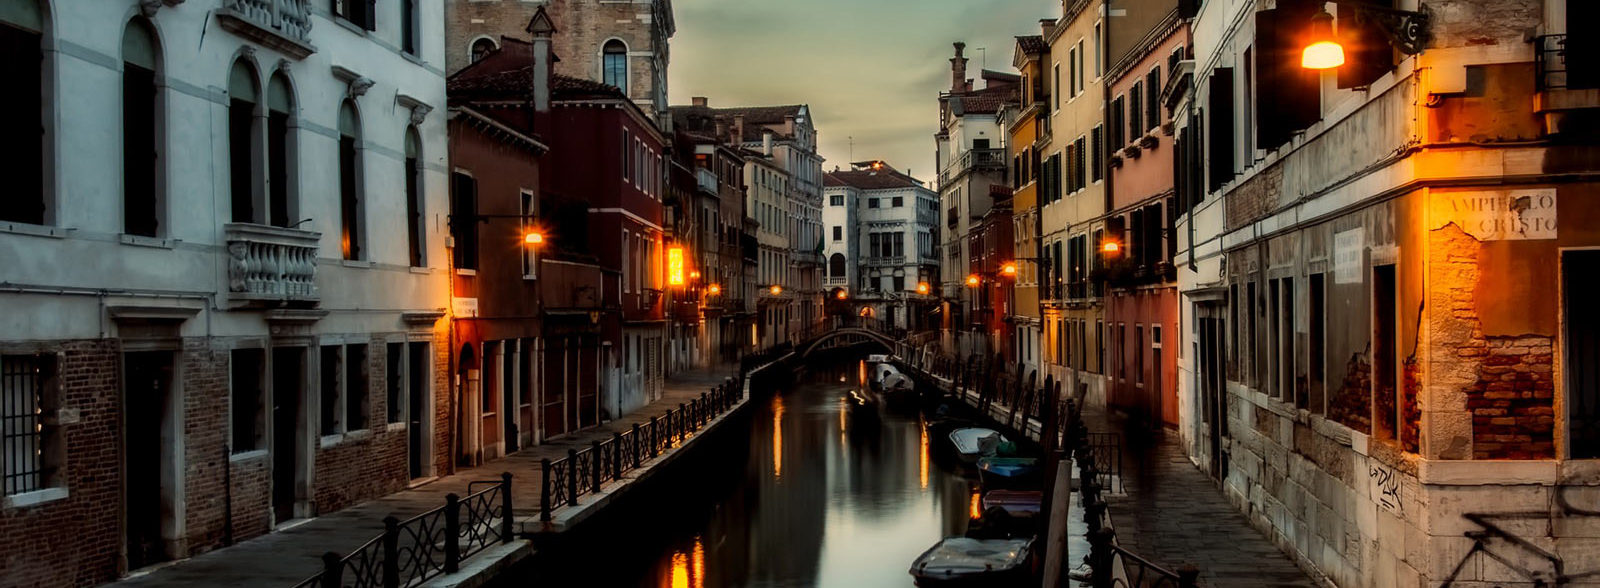 Things to do in Venice, Italy: the attractions you can’t miss